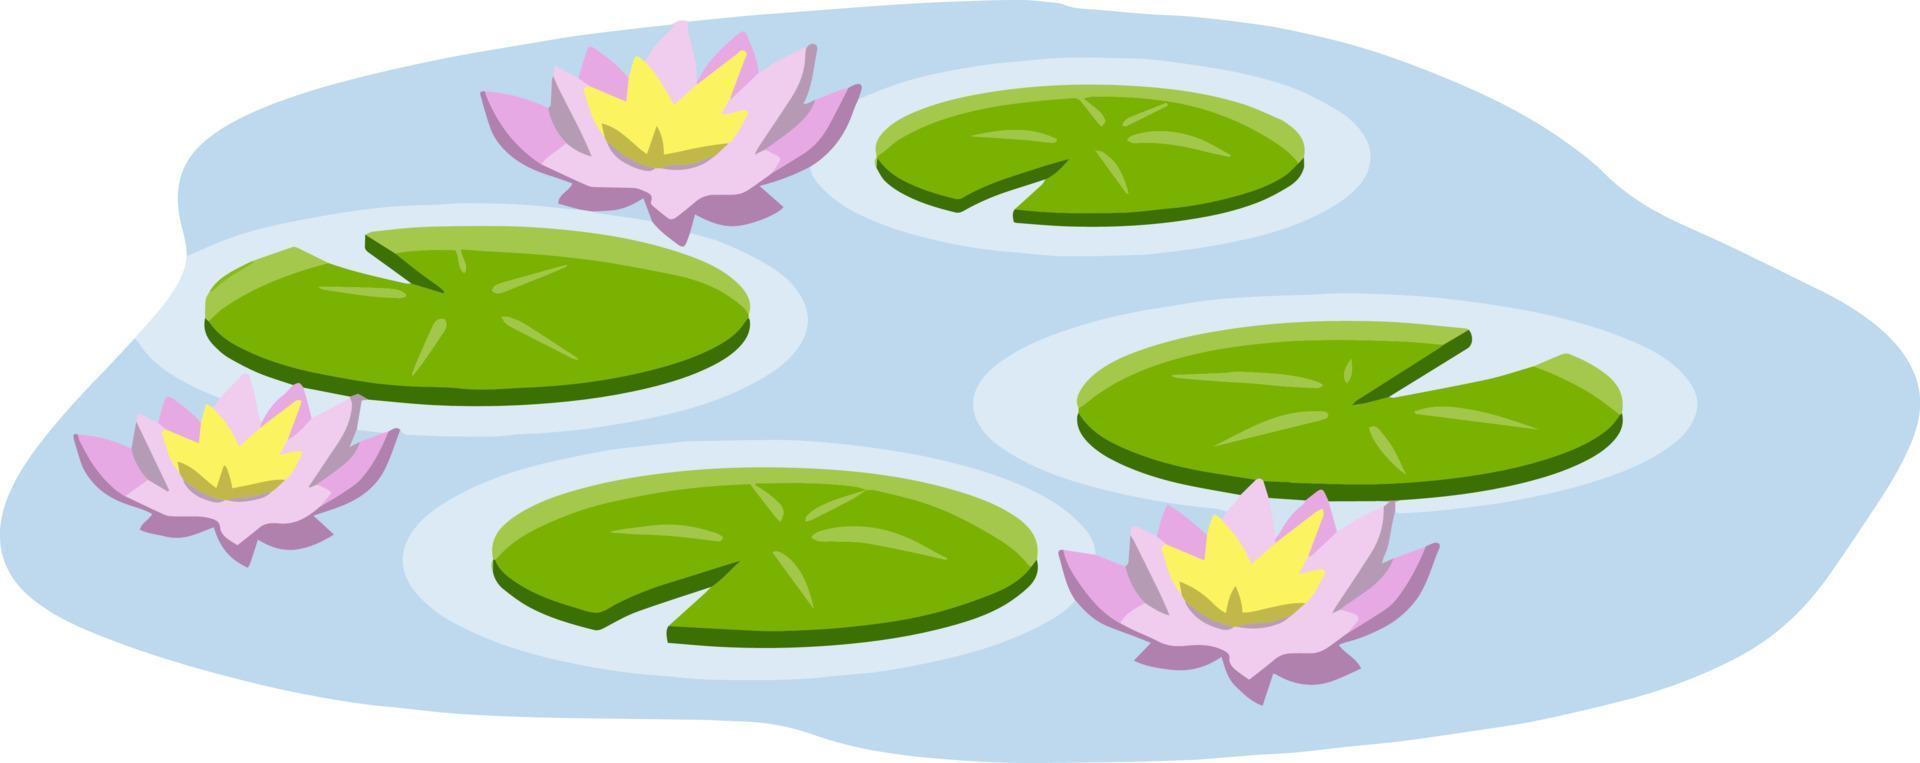 Nenuphars. Water lily. Plant on lake and reservoir. Big green leaf. Element of nature, forest and wild life. Swamp Pink flowers. Flat cartoon vector